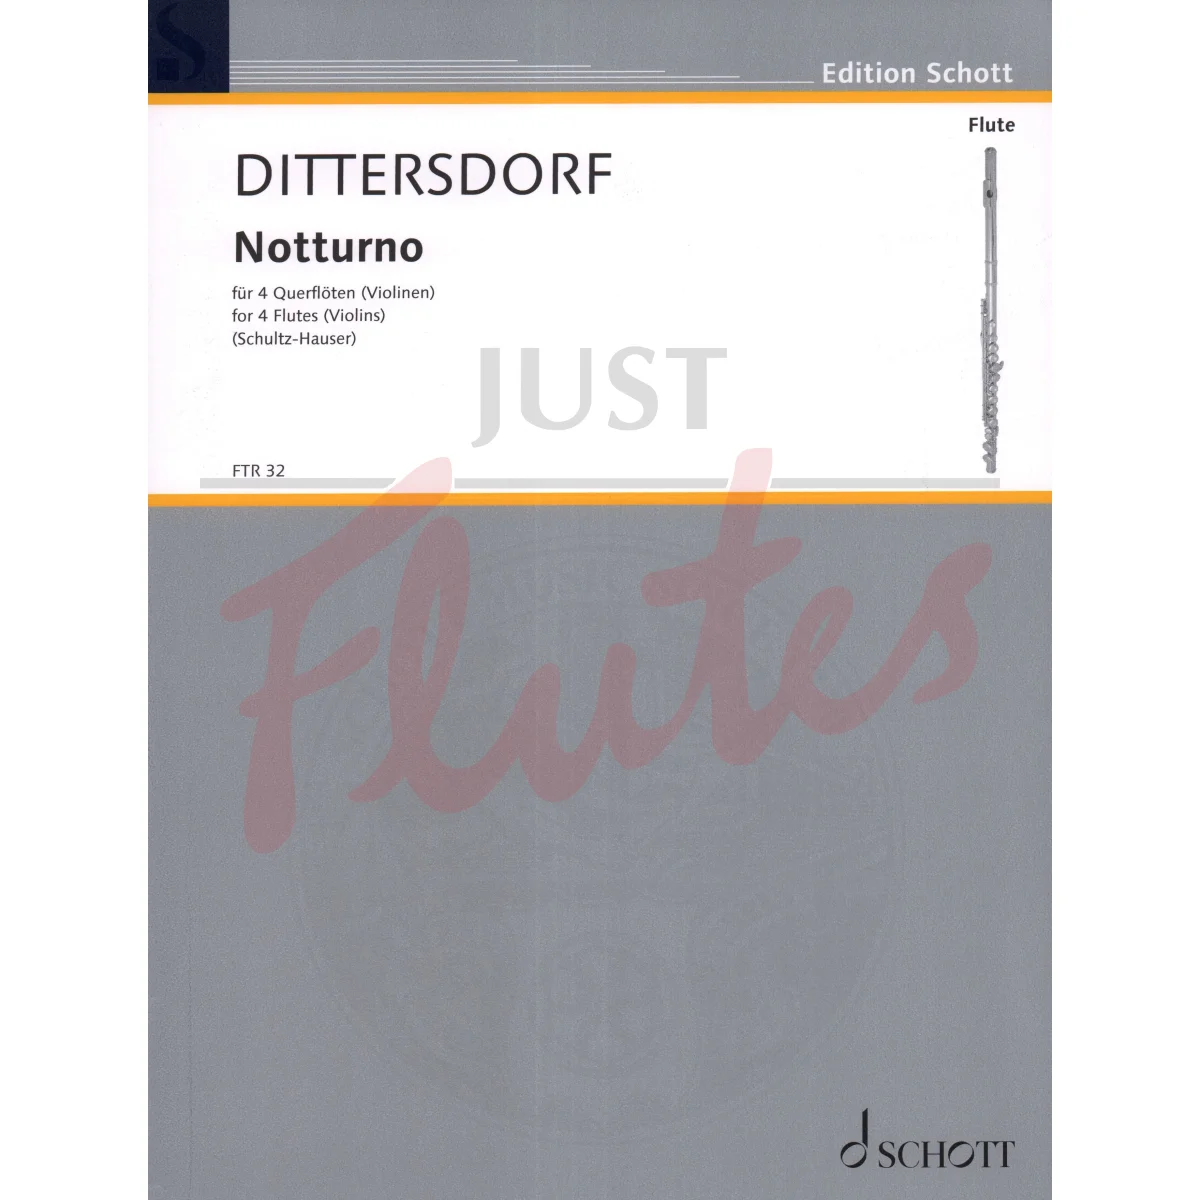 Notturno for Four Flutes